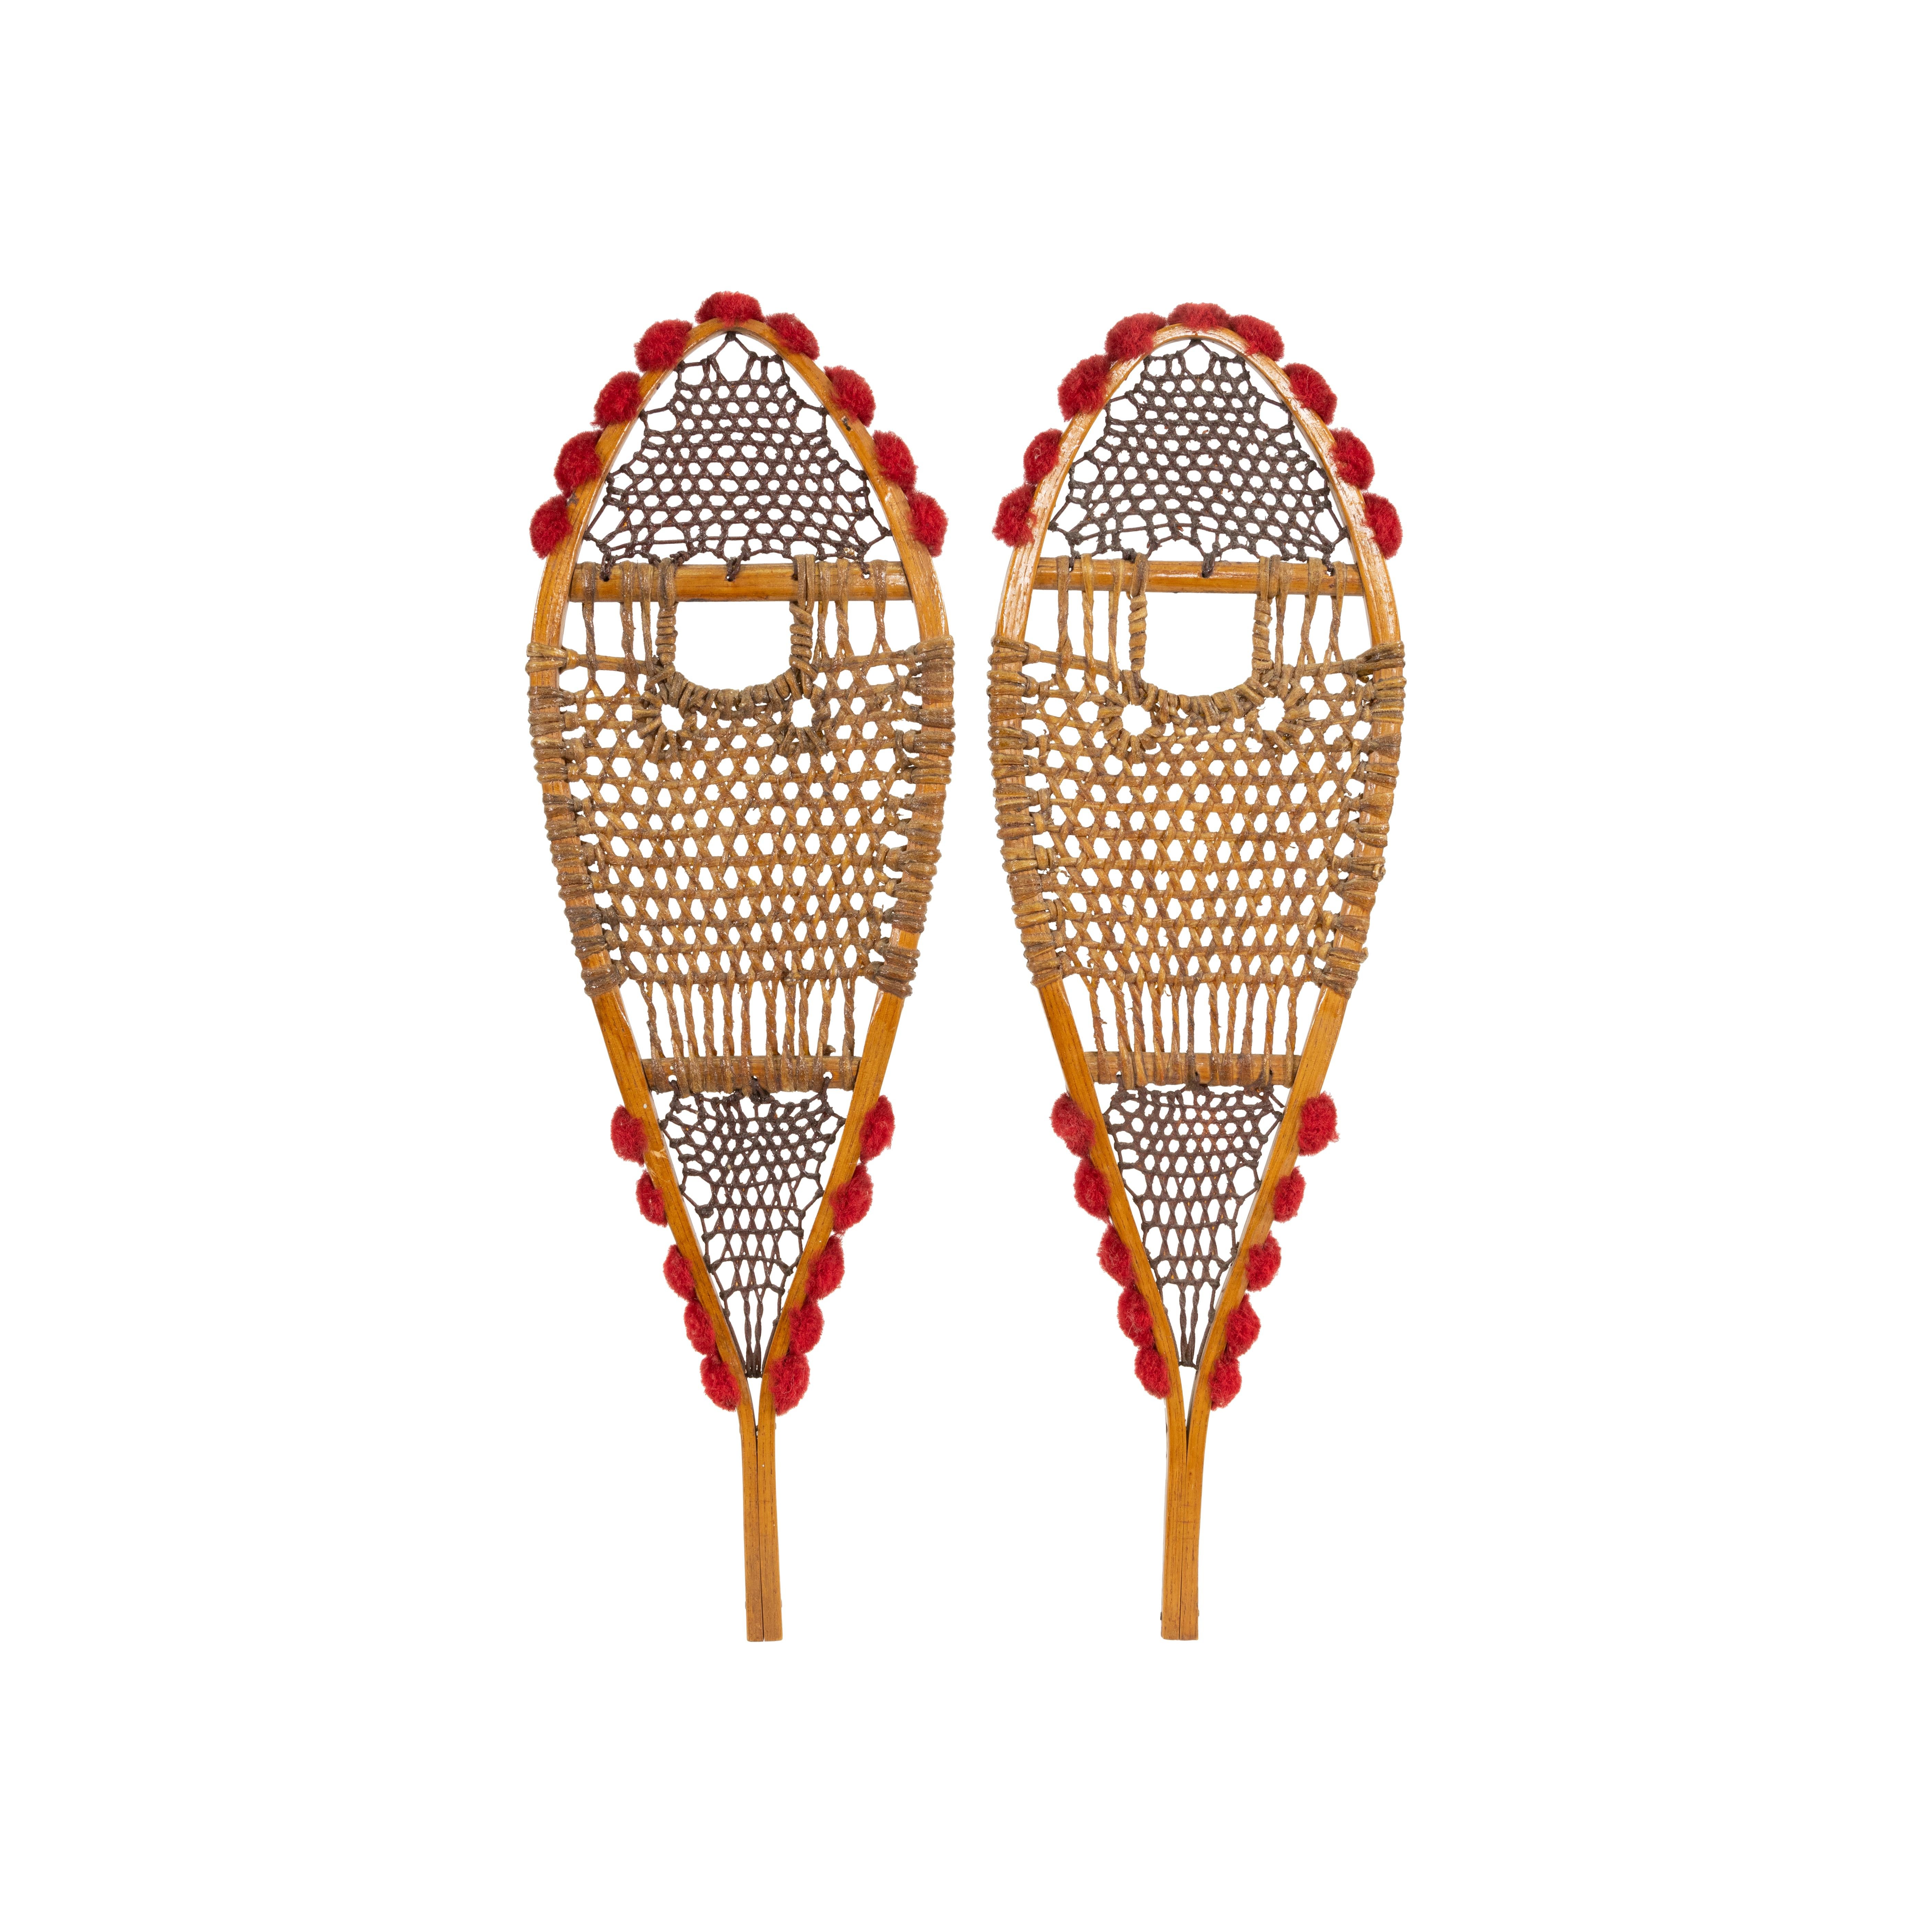 Hand-Crafted 1920s Native American Ojibwe Sample Snowshoes